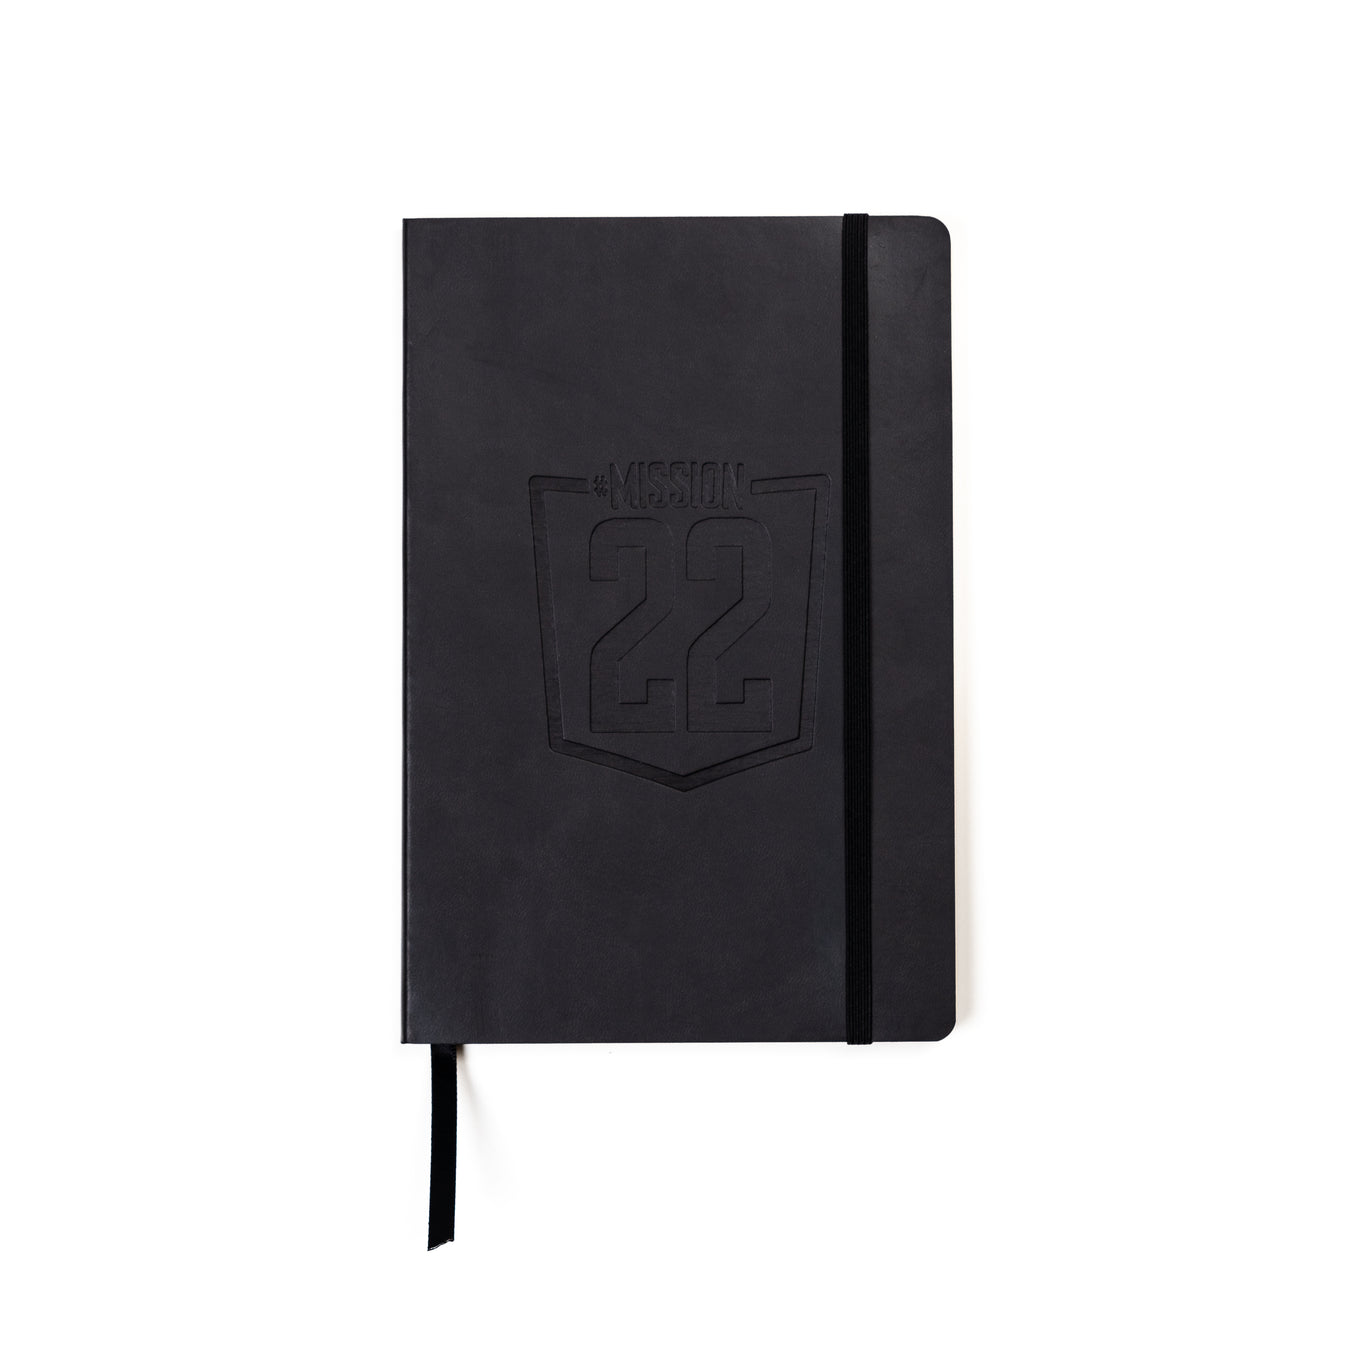 Mission 22 Notebook | Mission 22